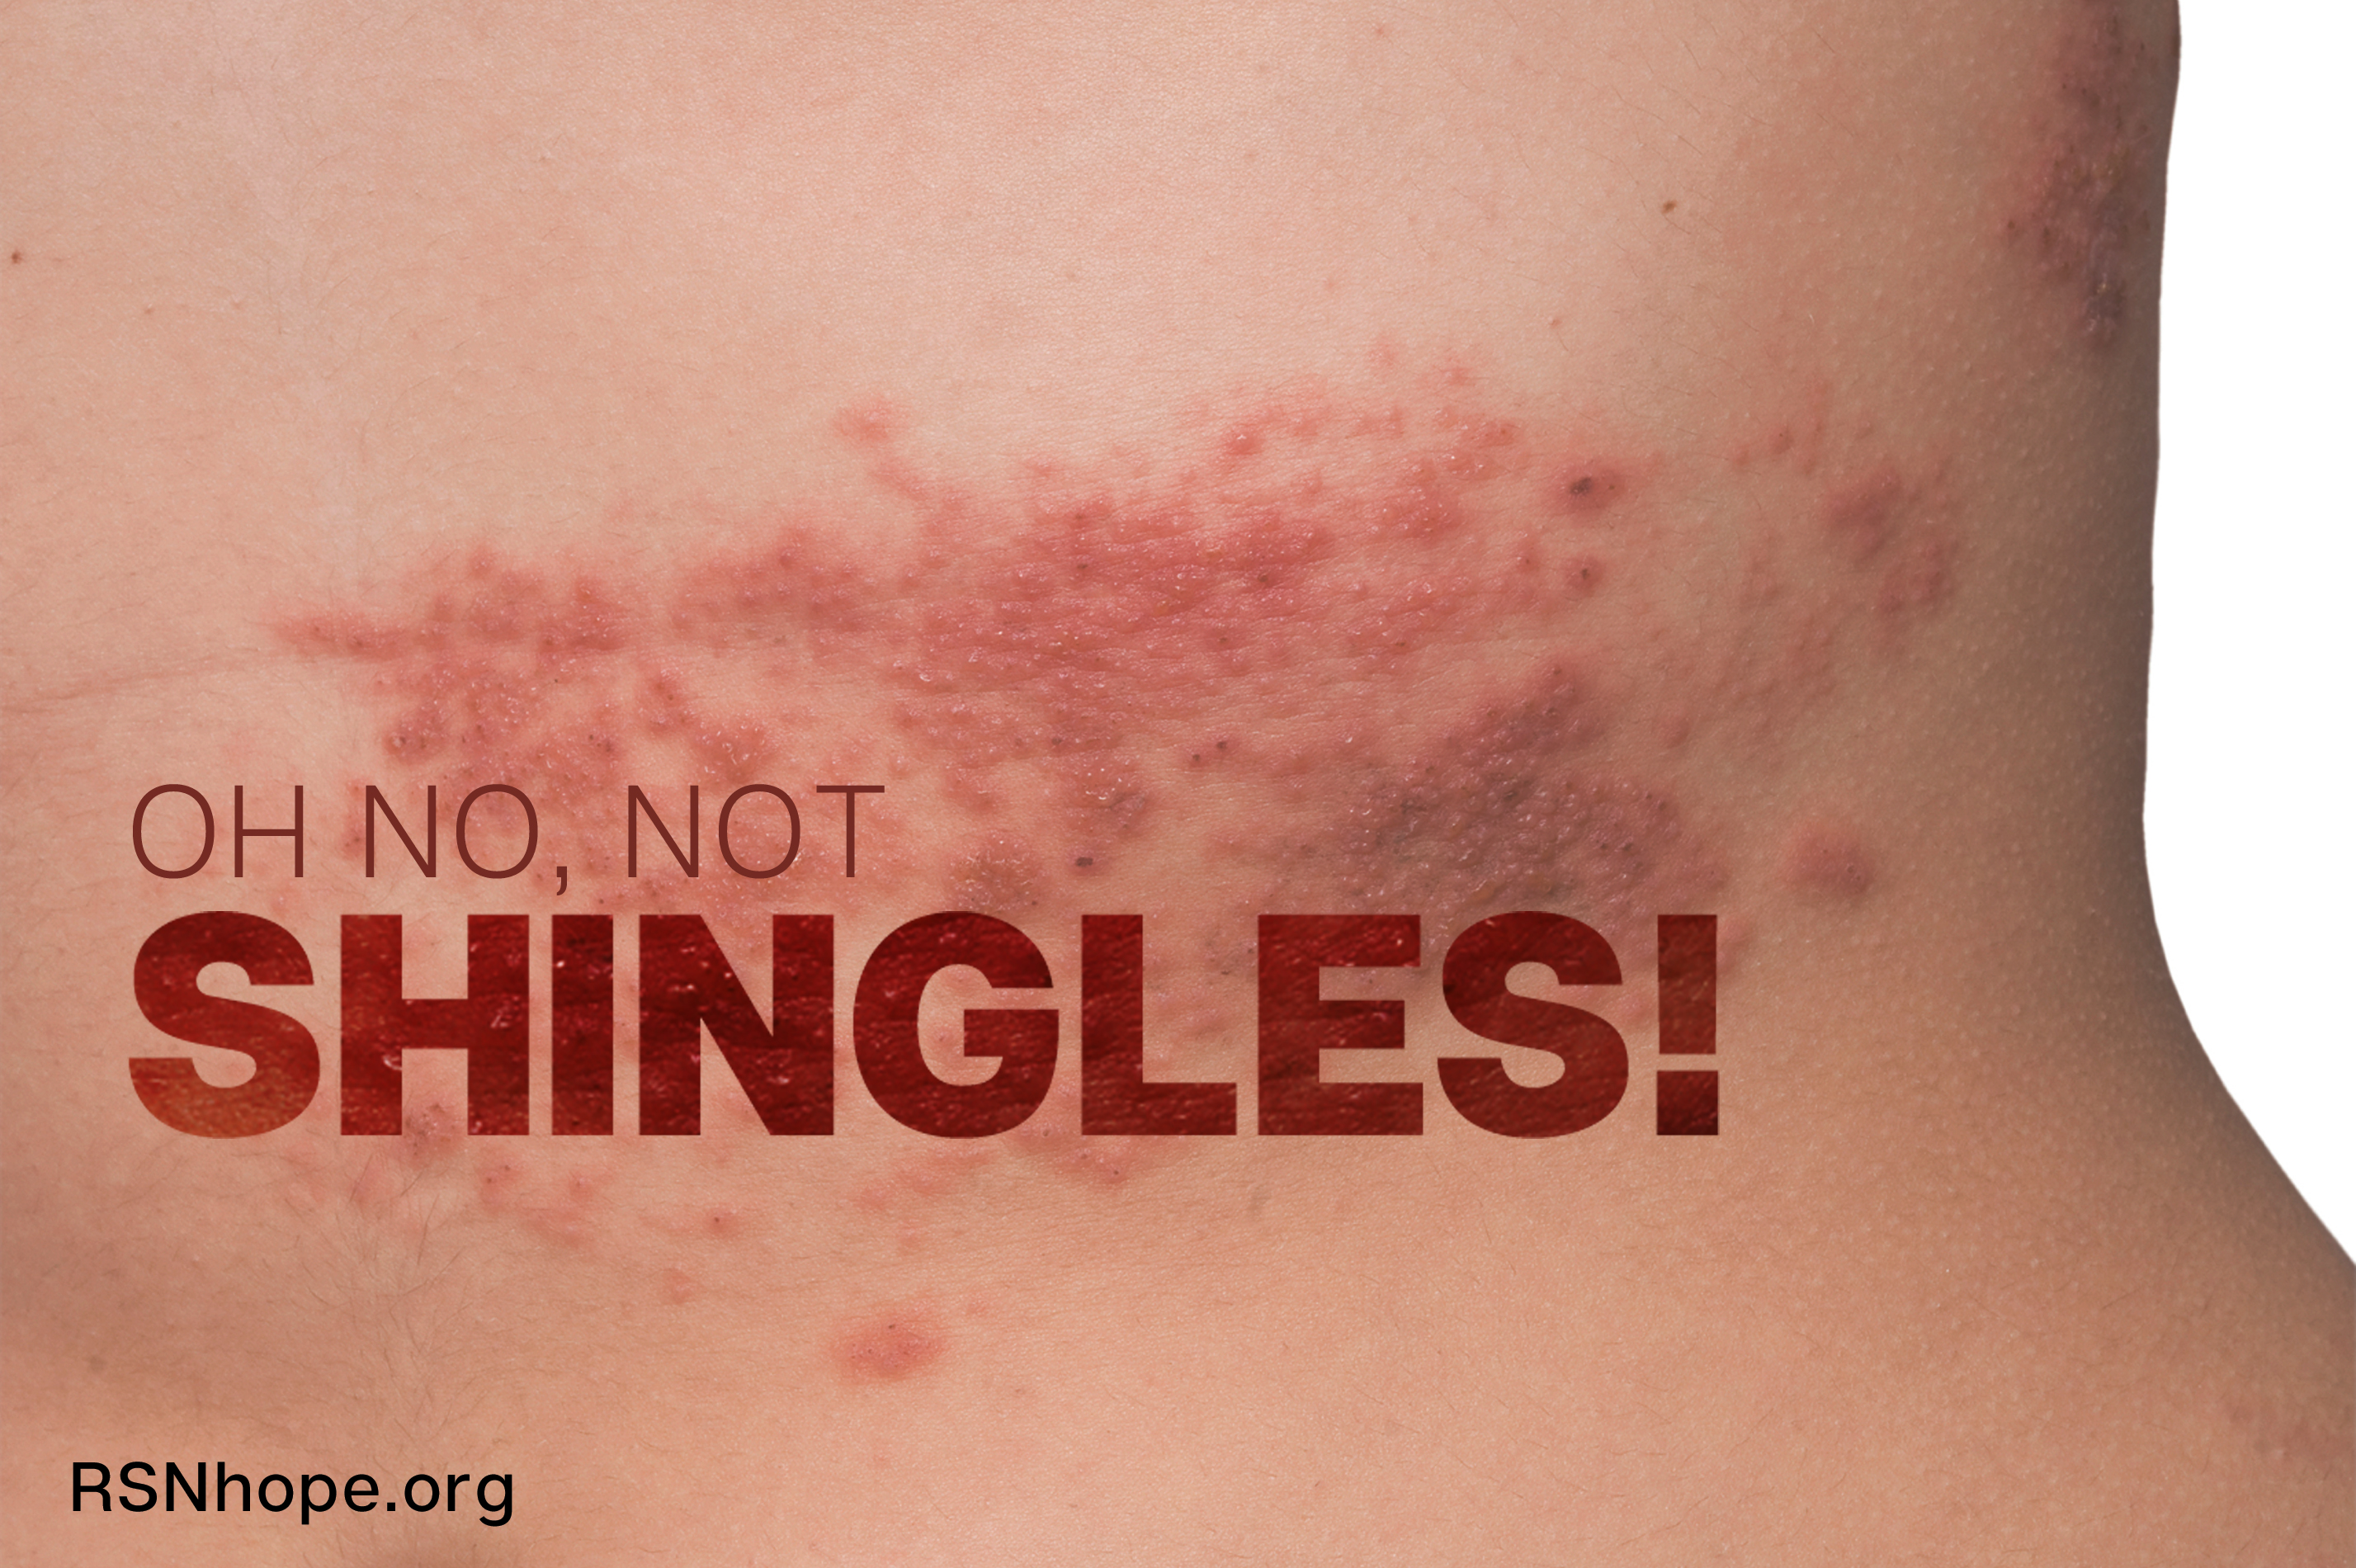 oh no! not shingles! | renal support network